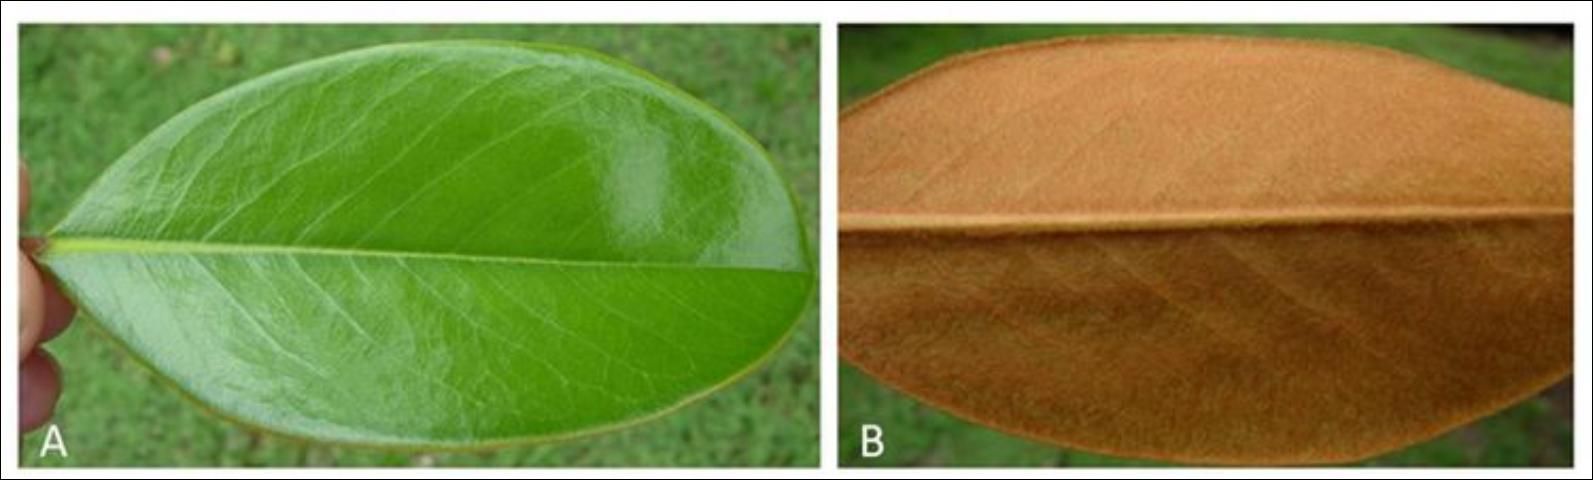 Figure 14. Magnolia leaves are glabrous on their top surfaces (A) and often have a rusty-orange pubescence on their bottom surfaces (B).